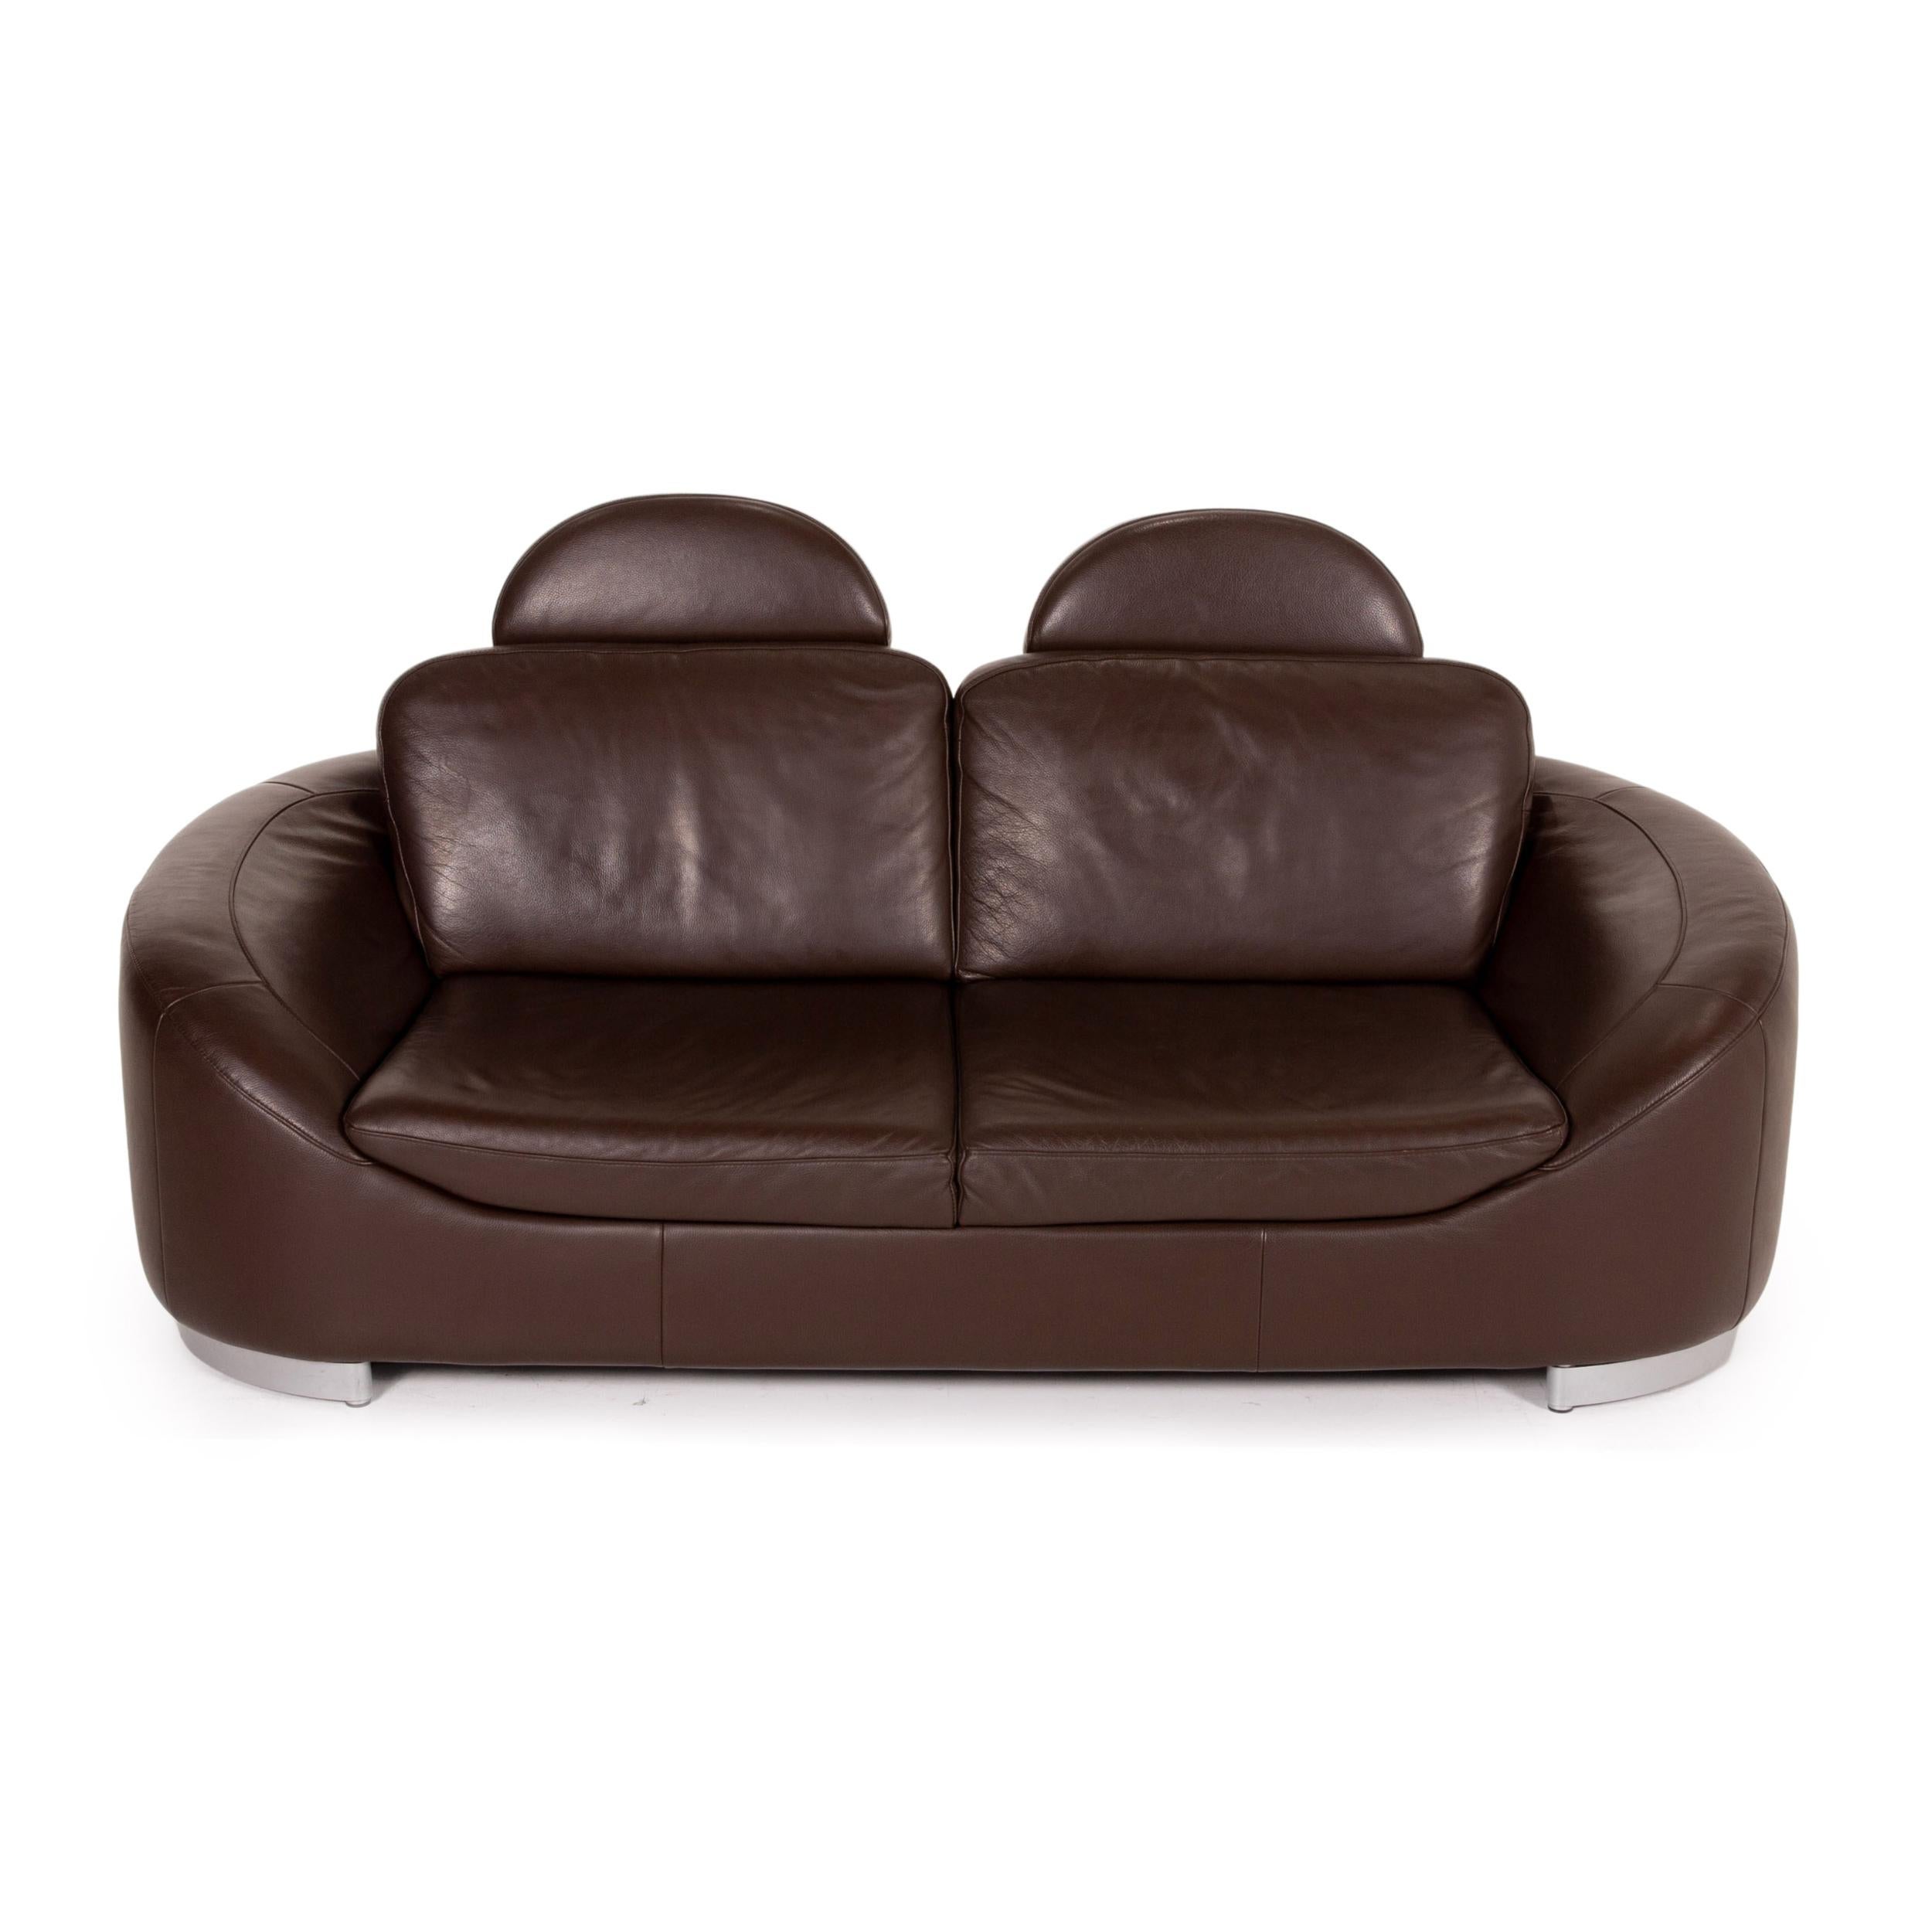 Contemporary Ewald Schillig Leather Sofa Brown Dark Brown Two-Seater Couch For Sale